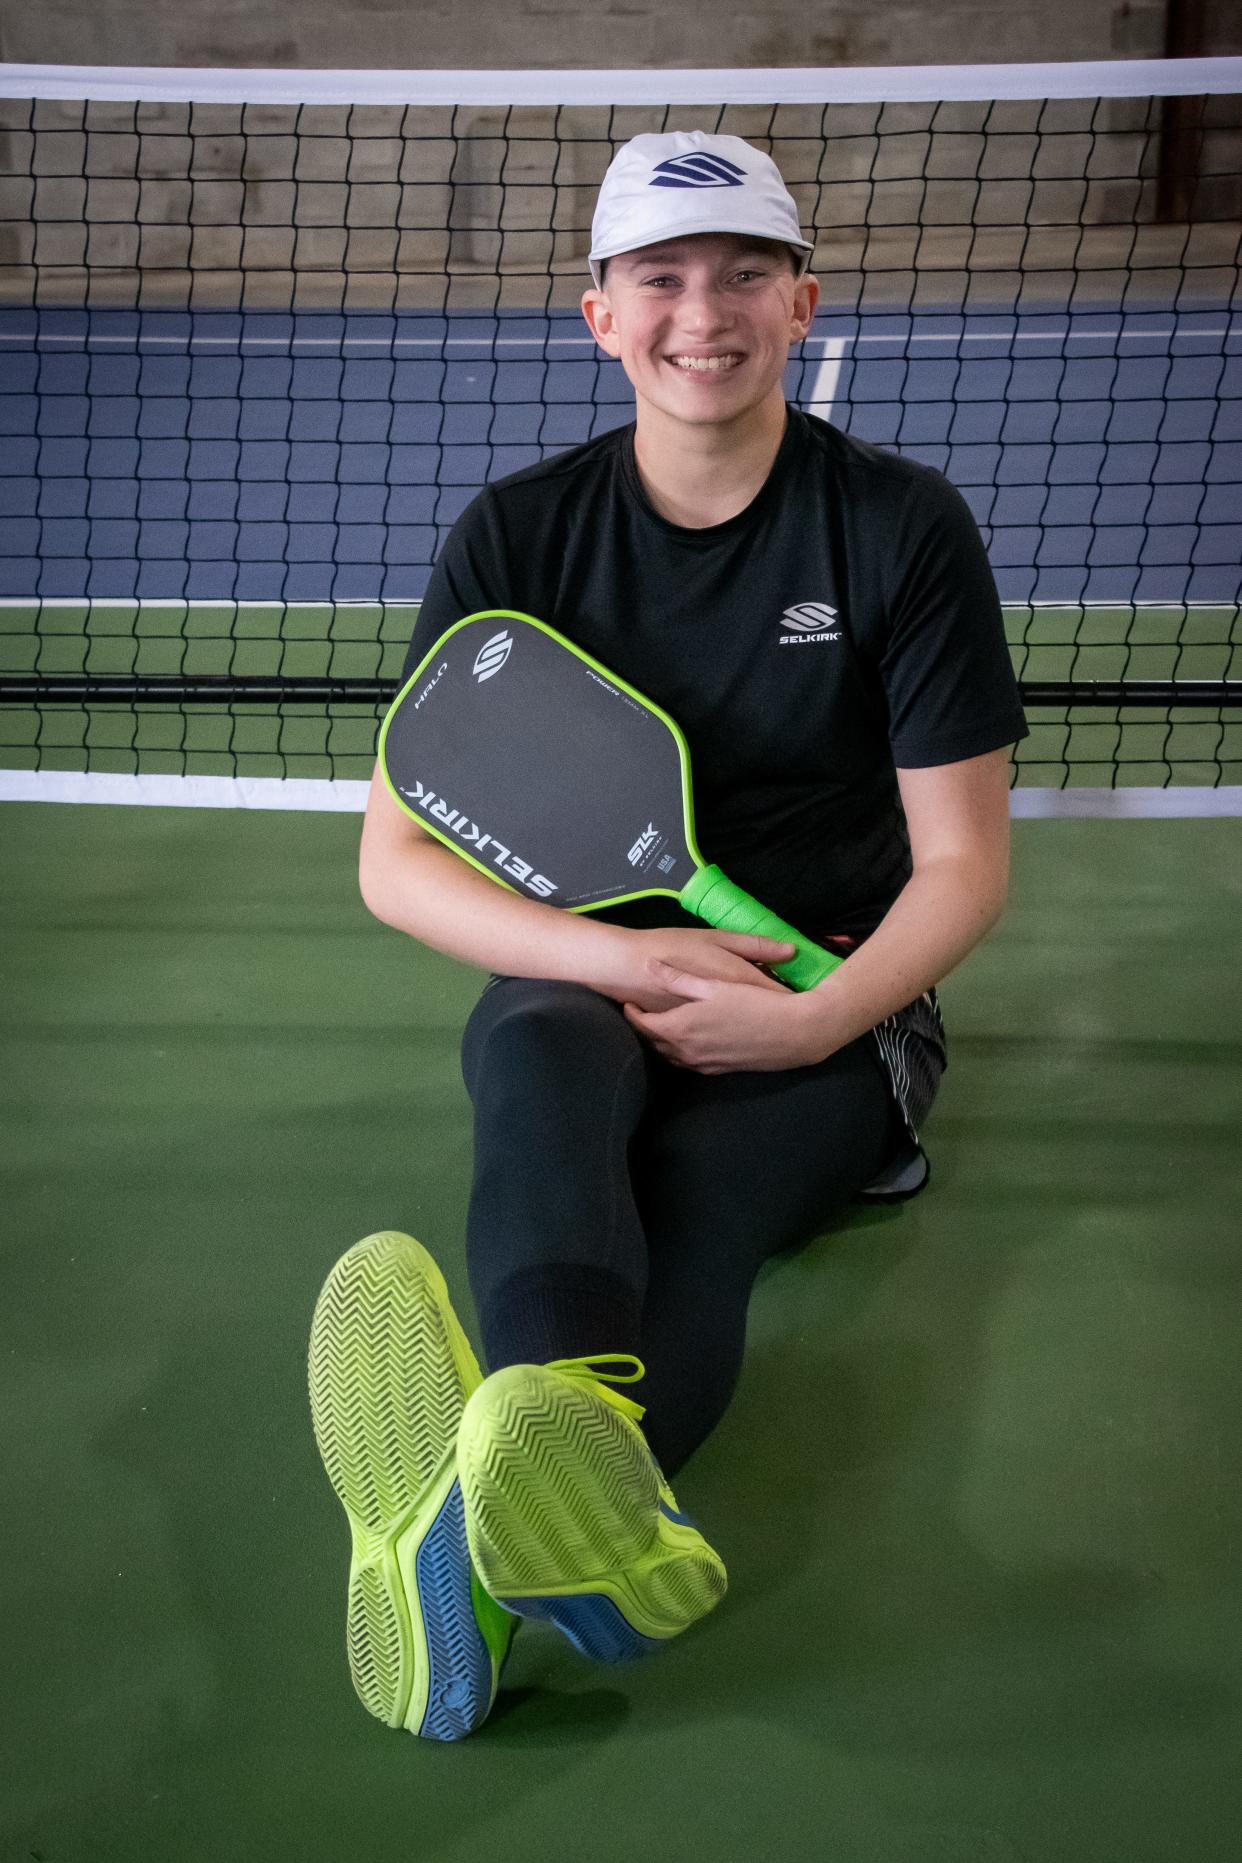 Cambridge pickleball player Jaqueline Bradshaw recently won silver at the Minto U.S. Open Pickleball Championship in Naples, Florida.